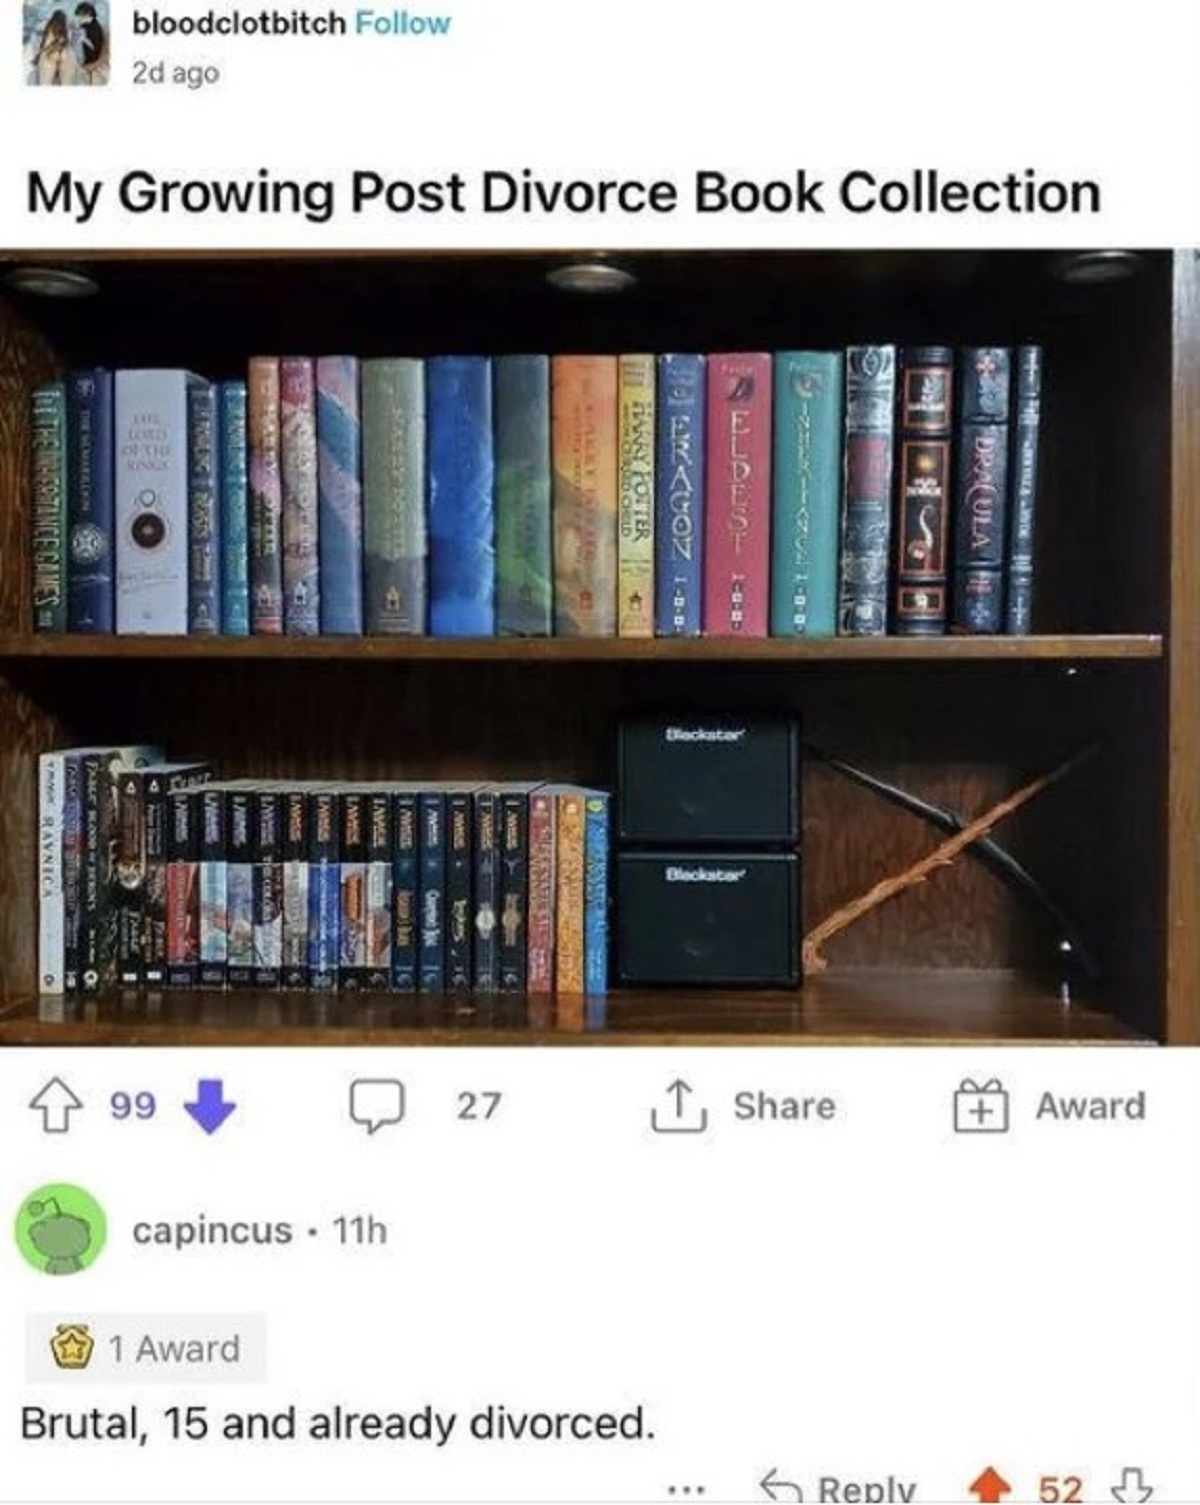 Book - bloodclotbitch 2d ago My Growing Post Divorce Book Collection The Somarelon Xate Lord 293 Nxx To The Inheritance Games Fable Hood & Berks Ravnica 99 Harry Potter capincus 11h Blackstar Bleckstor 27 Award 1 Award Brutal, 15 and already divorced. 52